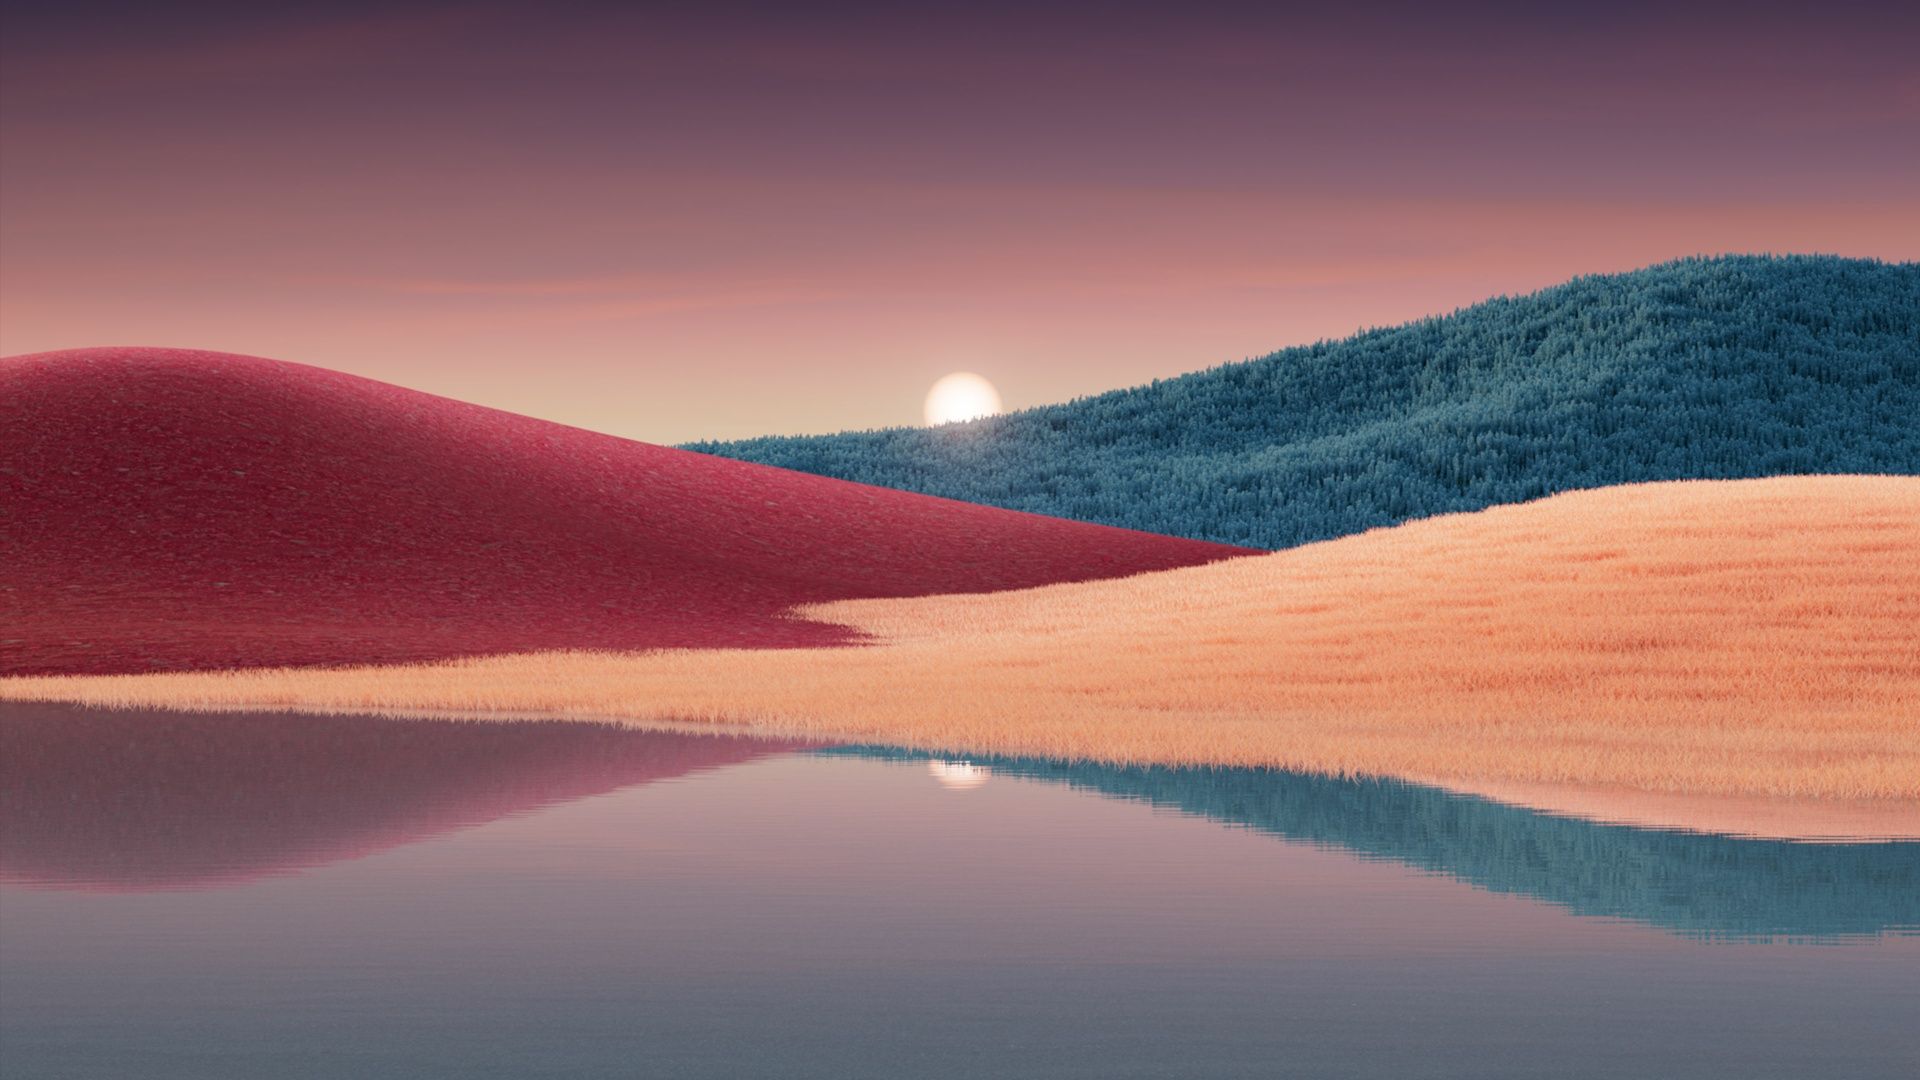 A red and blue landscape with a lake - 1920x1080